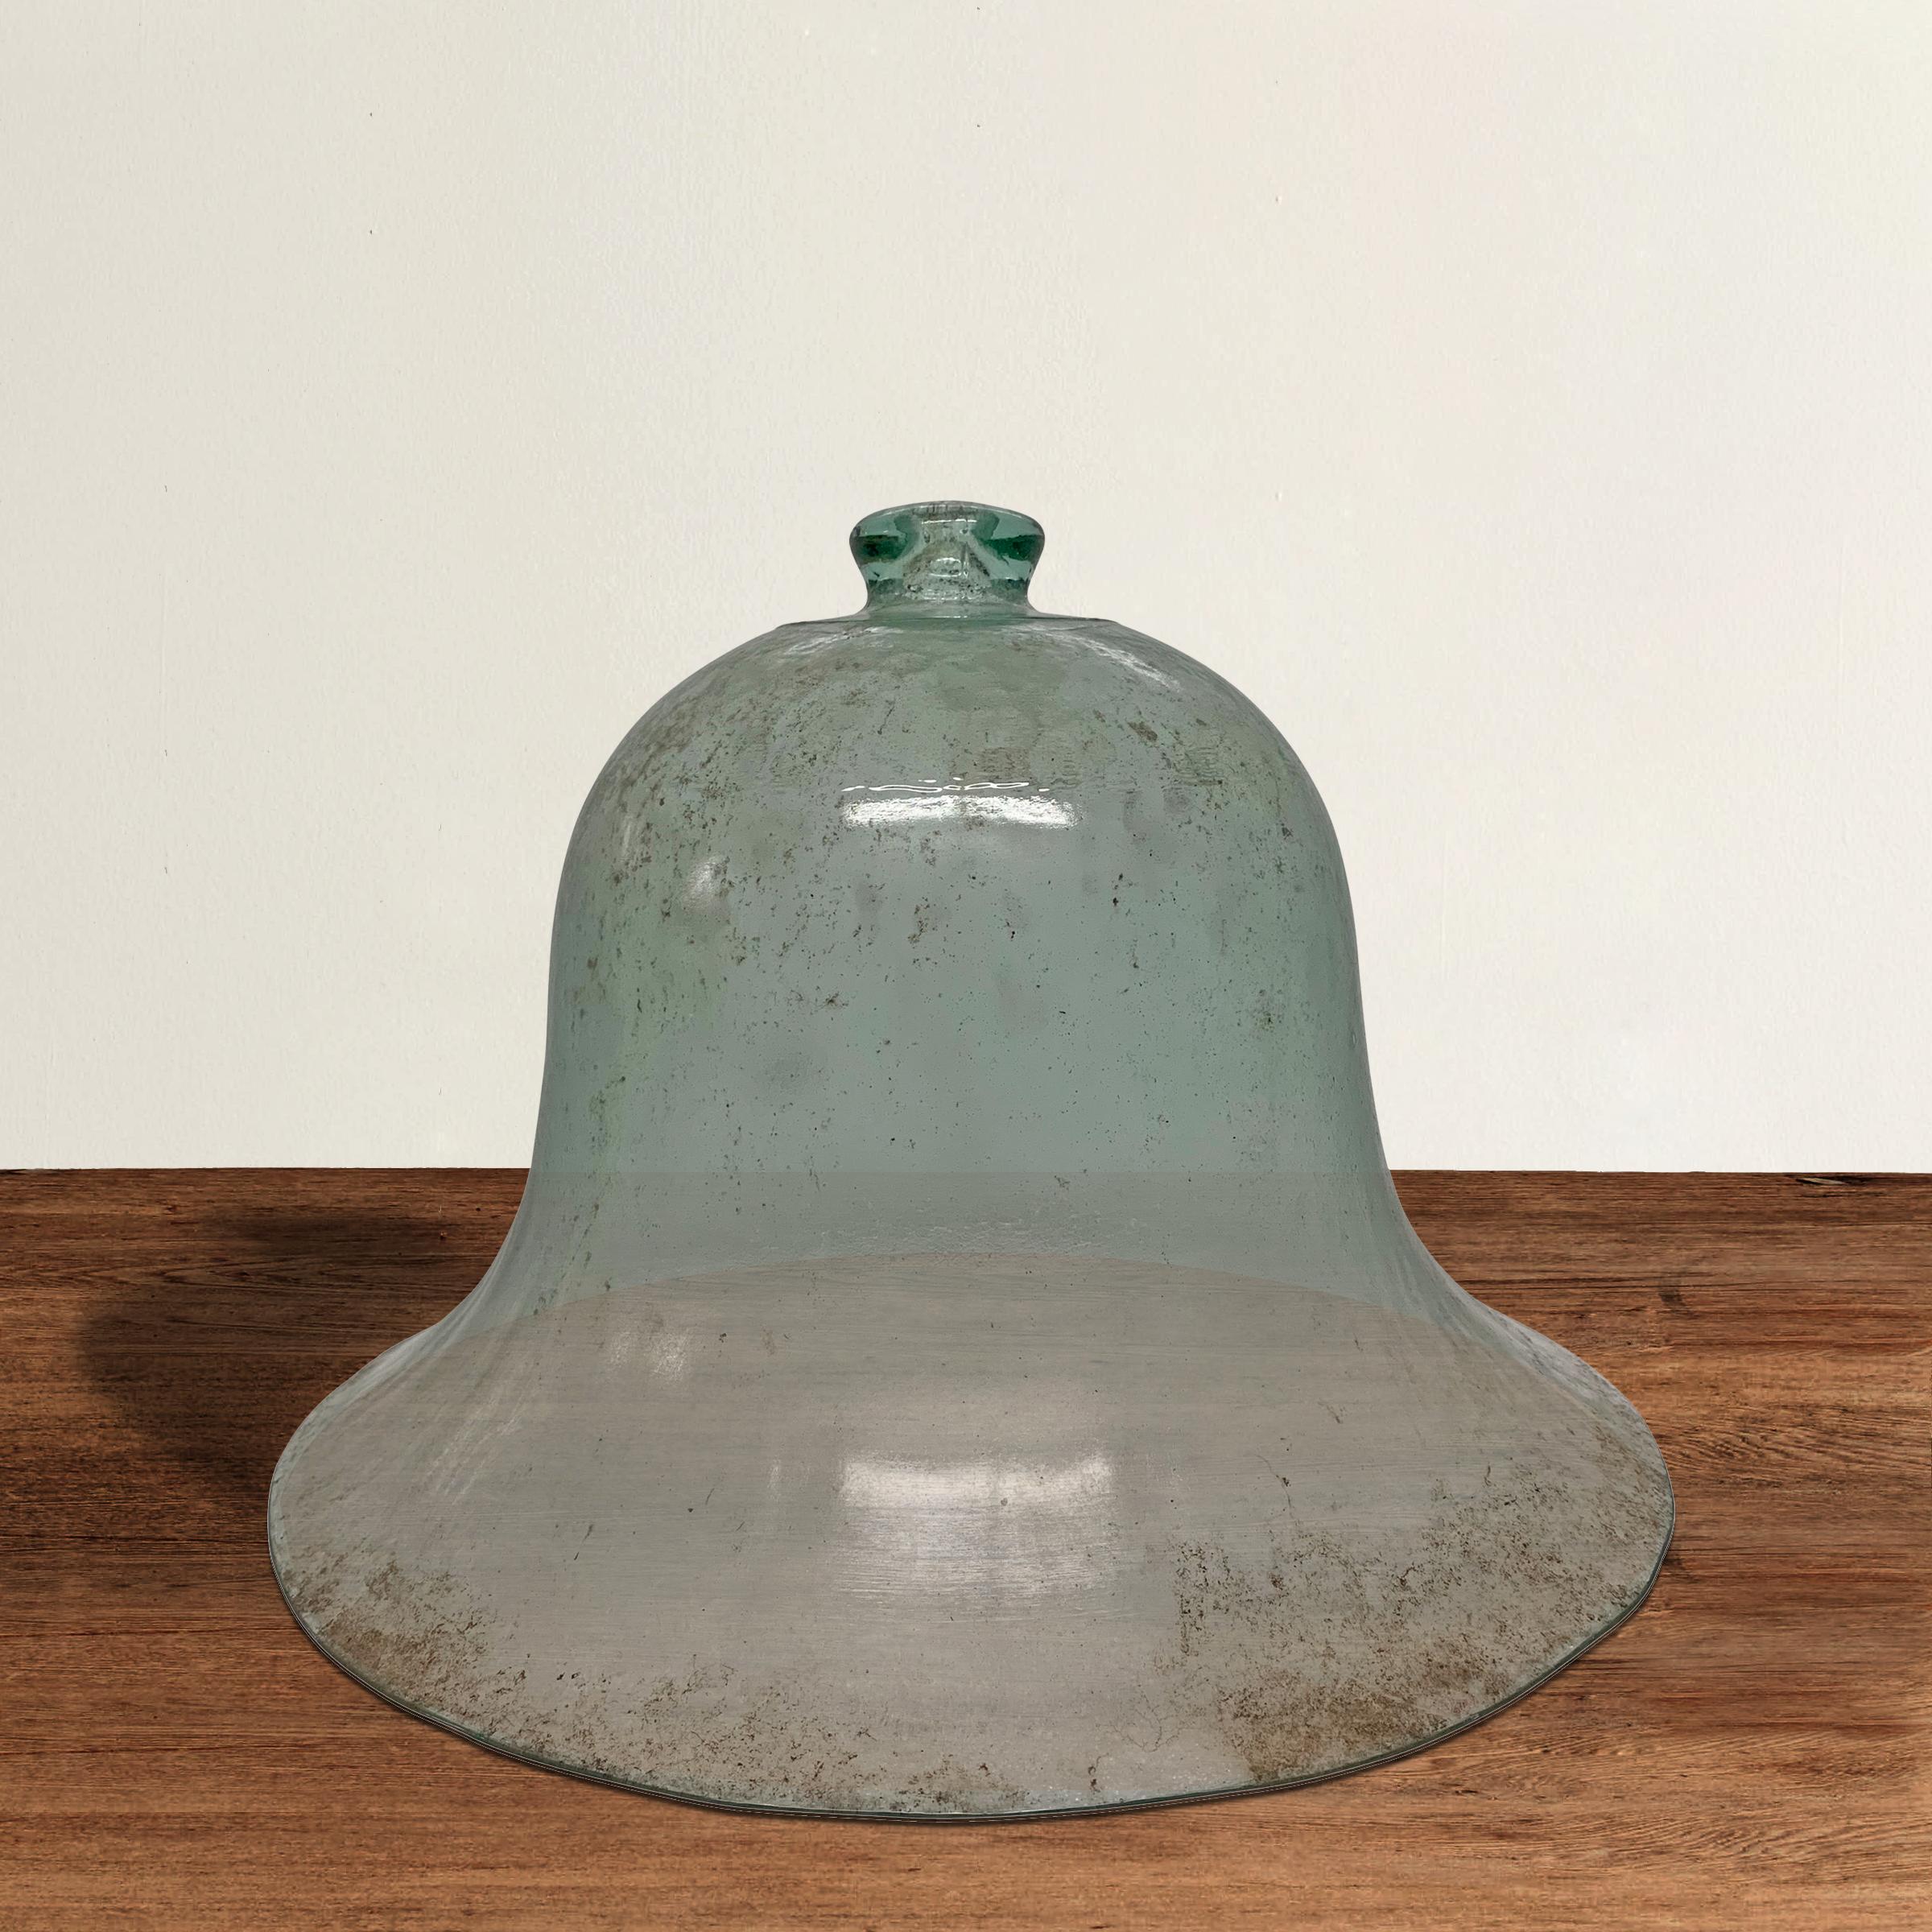 A wonderful bell-shape early 20th century French blown-glass garden cloche used to cover young plants to stimulate growth. Wonderful blue-green color!